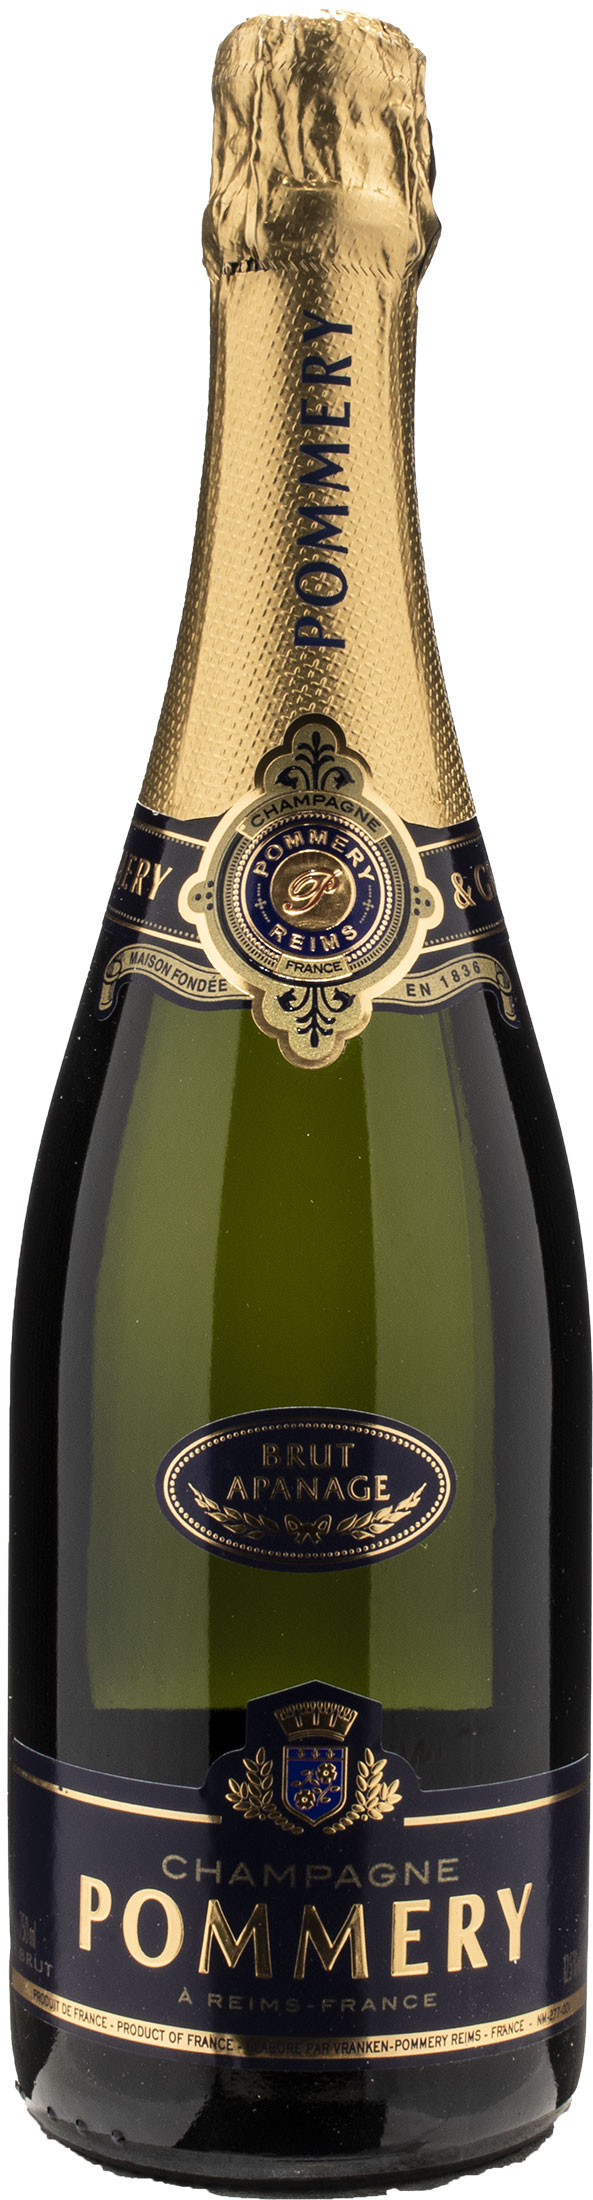 Pommery Champagne Apanage Brut